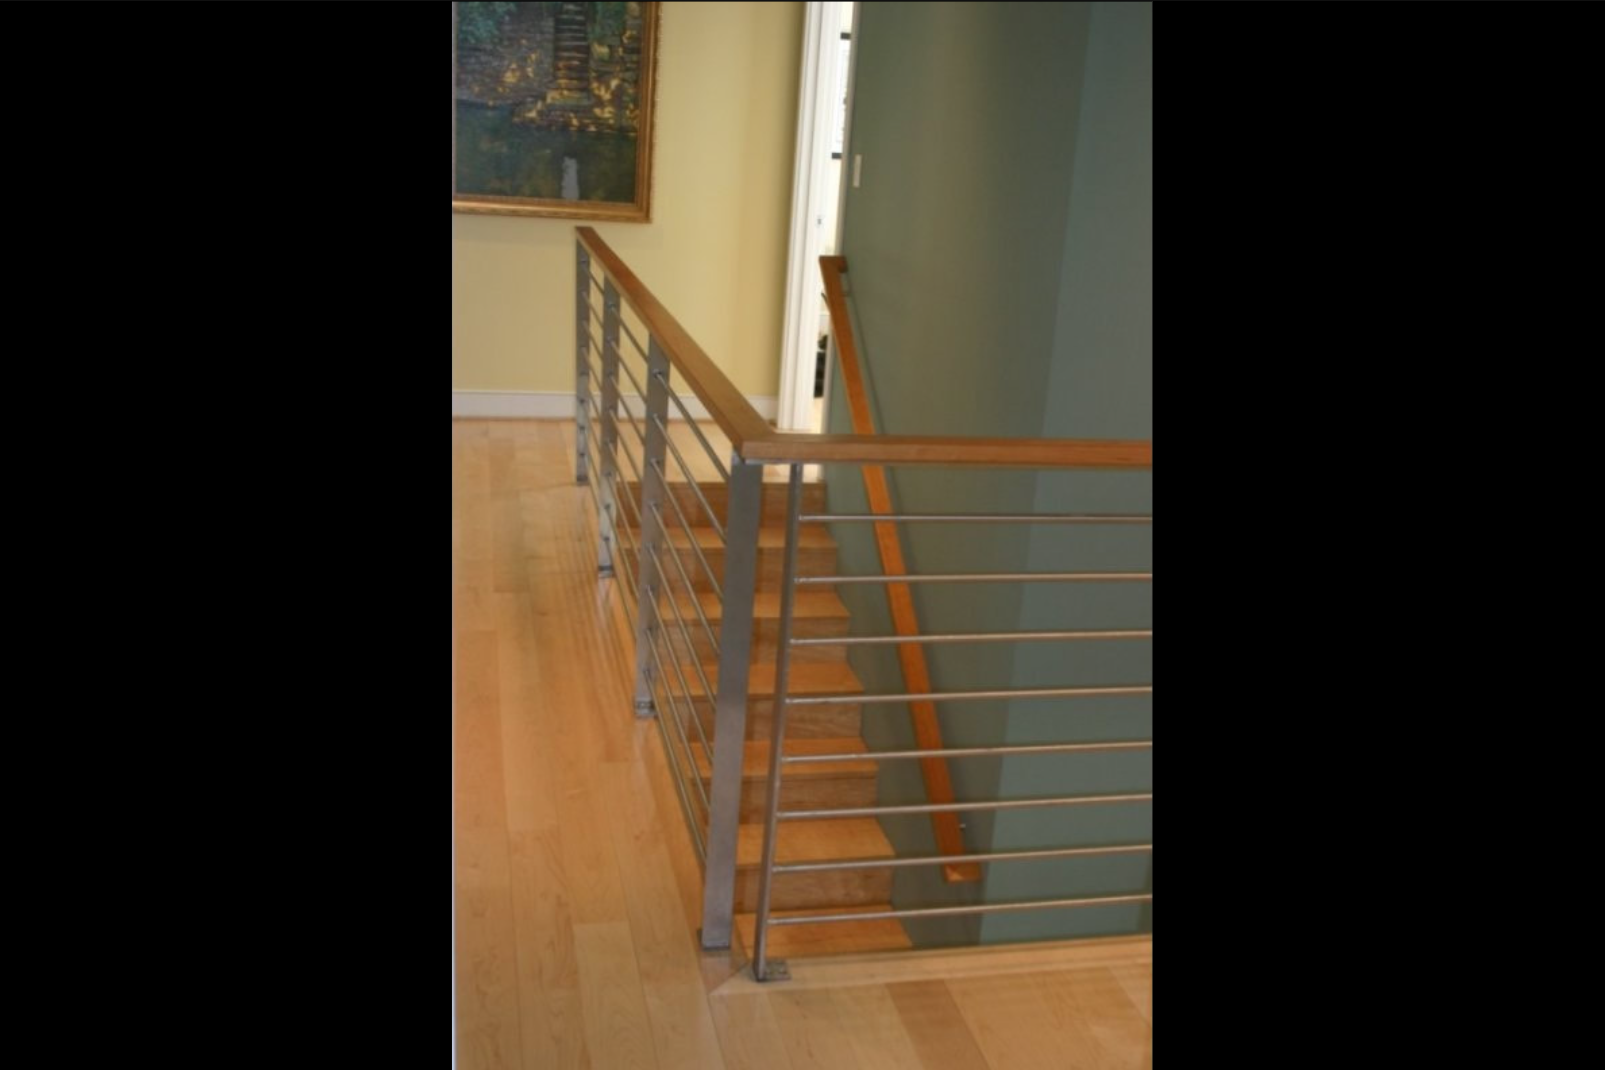 Photo of grey metal cable railing on wooden indoor staircase from the top